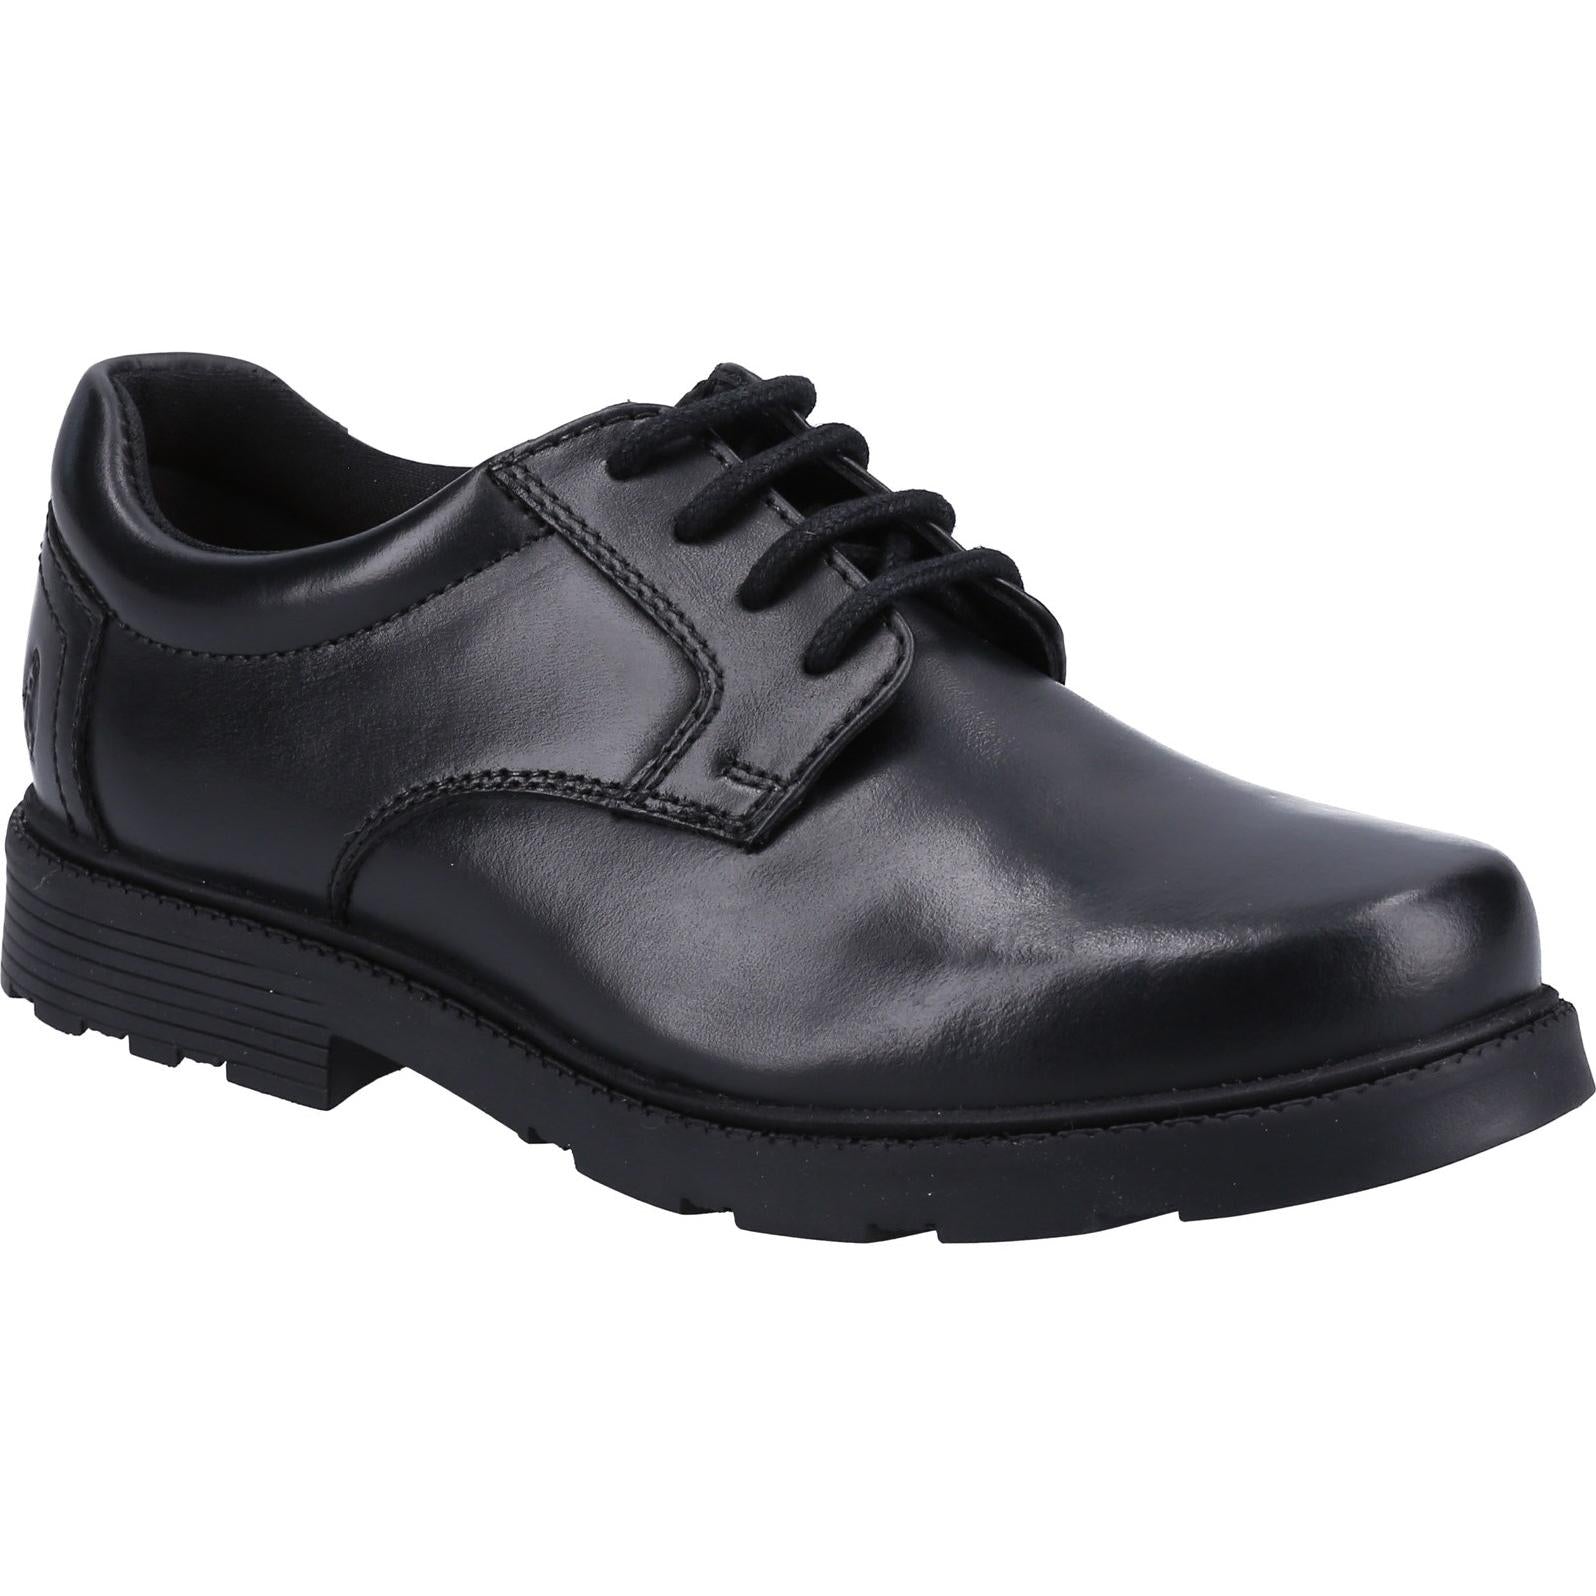 Hush Puppies Oliver SNR Shoe